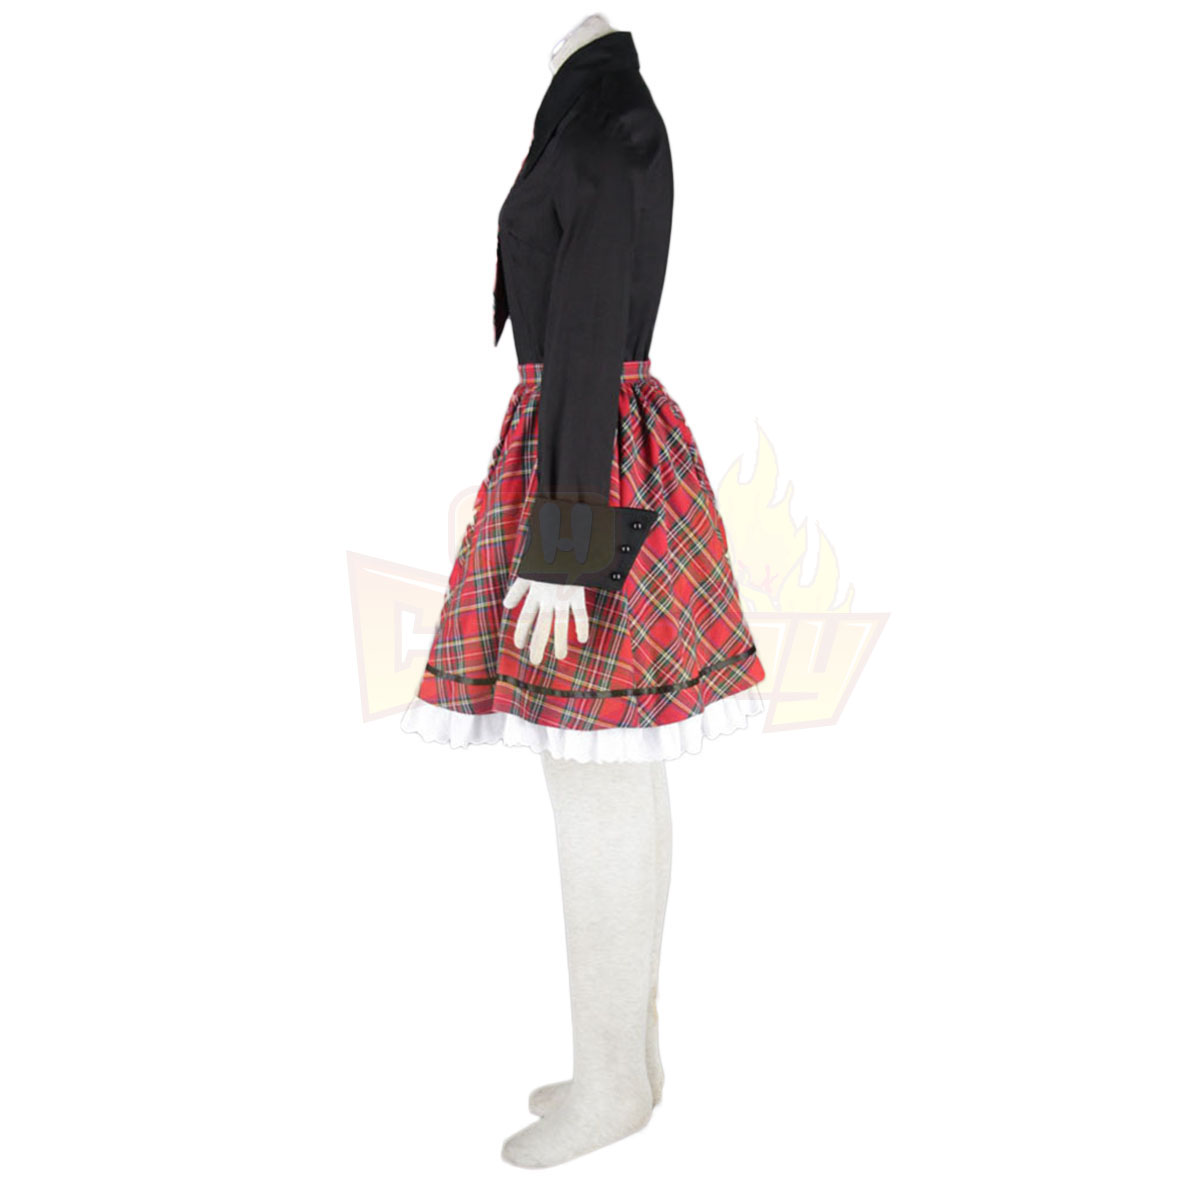 Deluxe Lolita Culture Black and Red Middle Dresses Cosplay Costumes